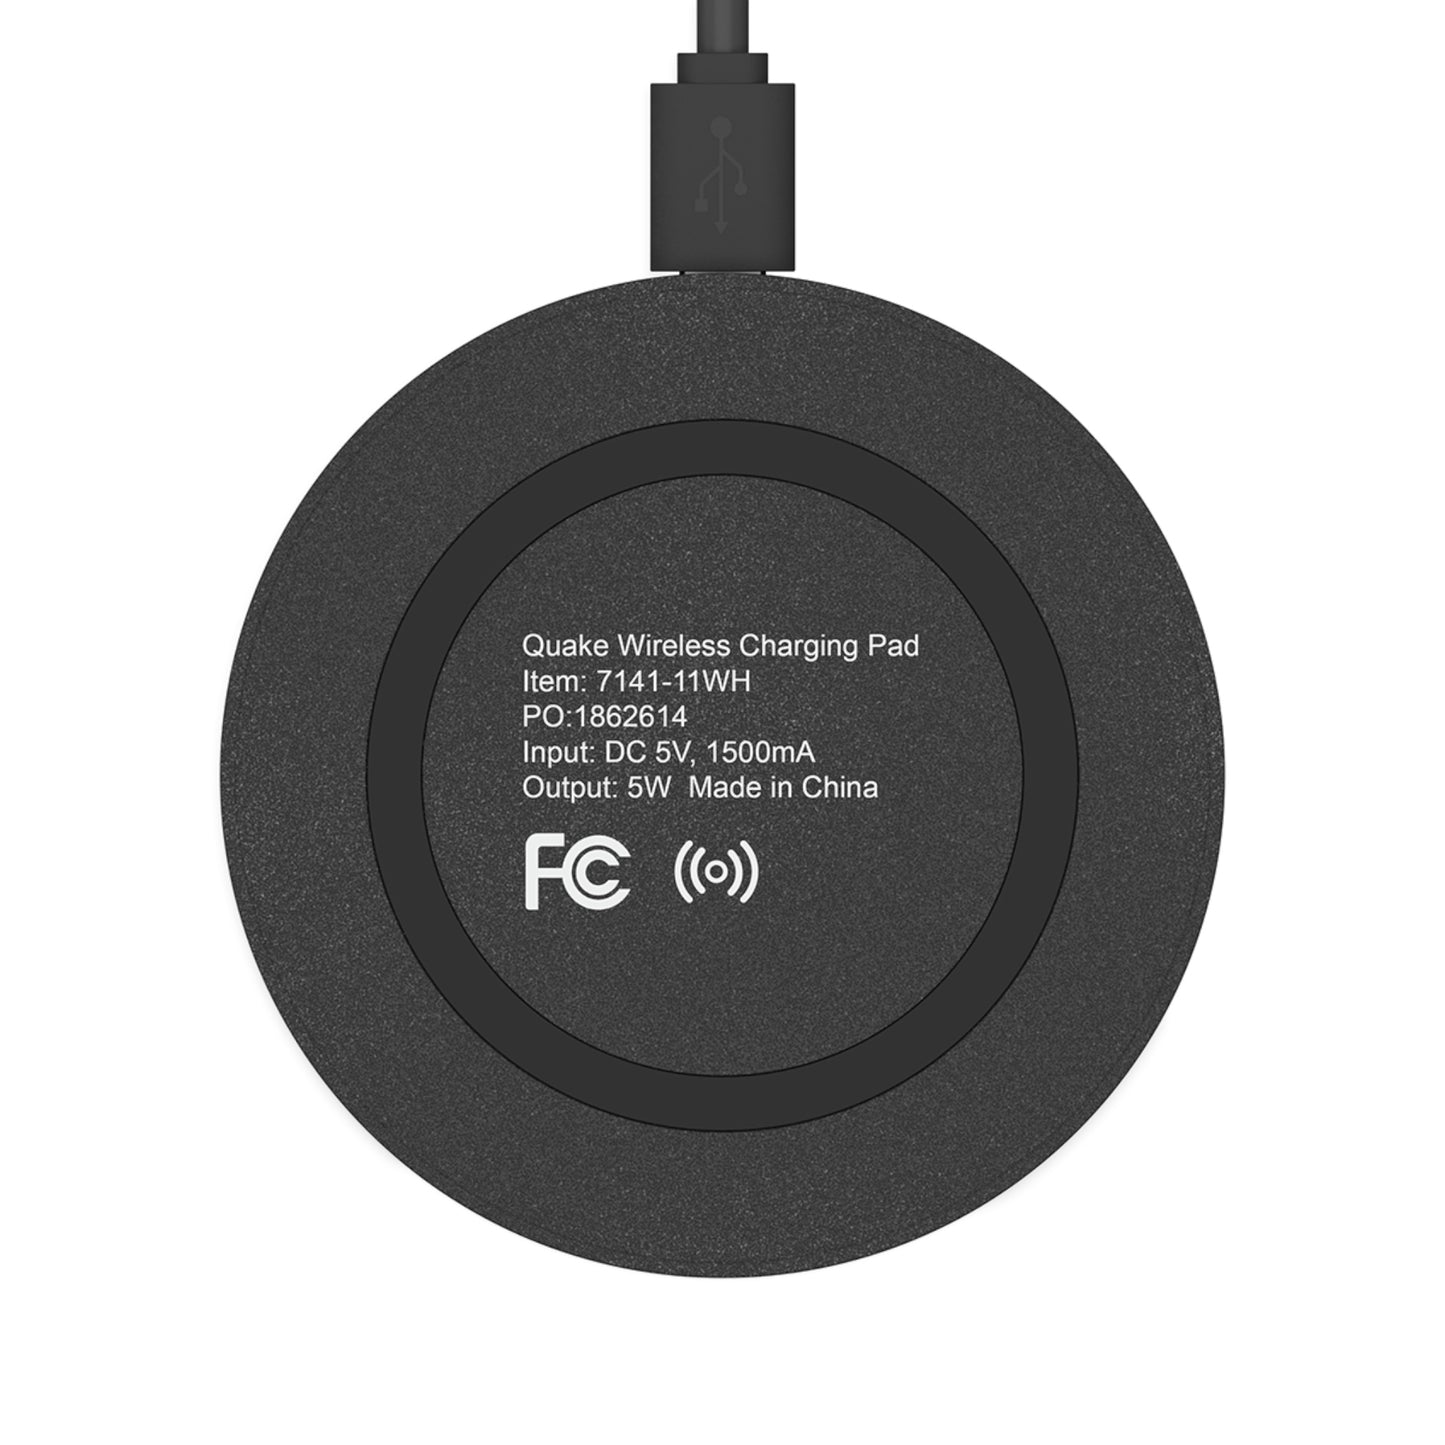 Afro Dystopia Quake Wireless Charging Pad